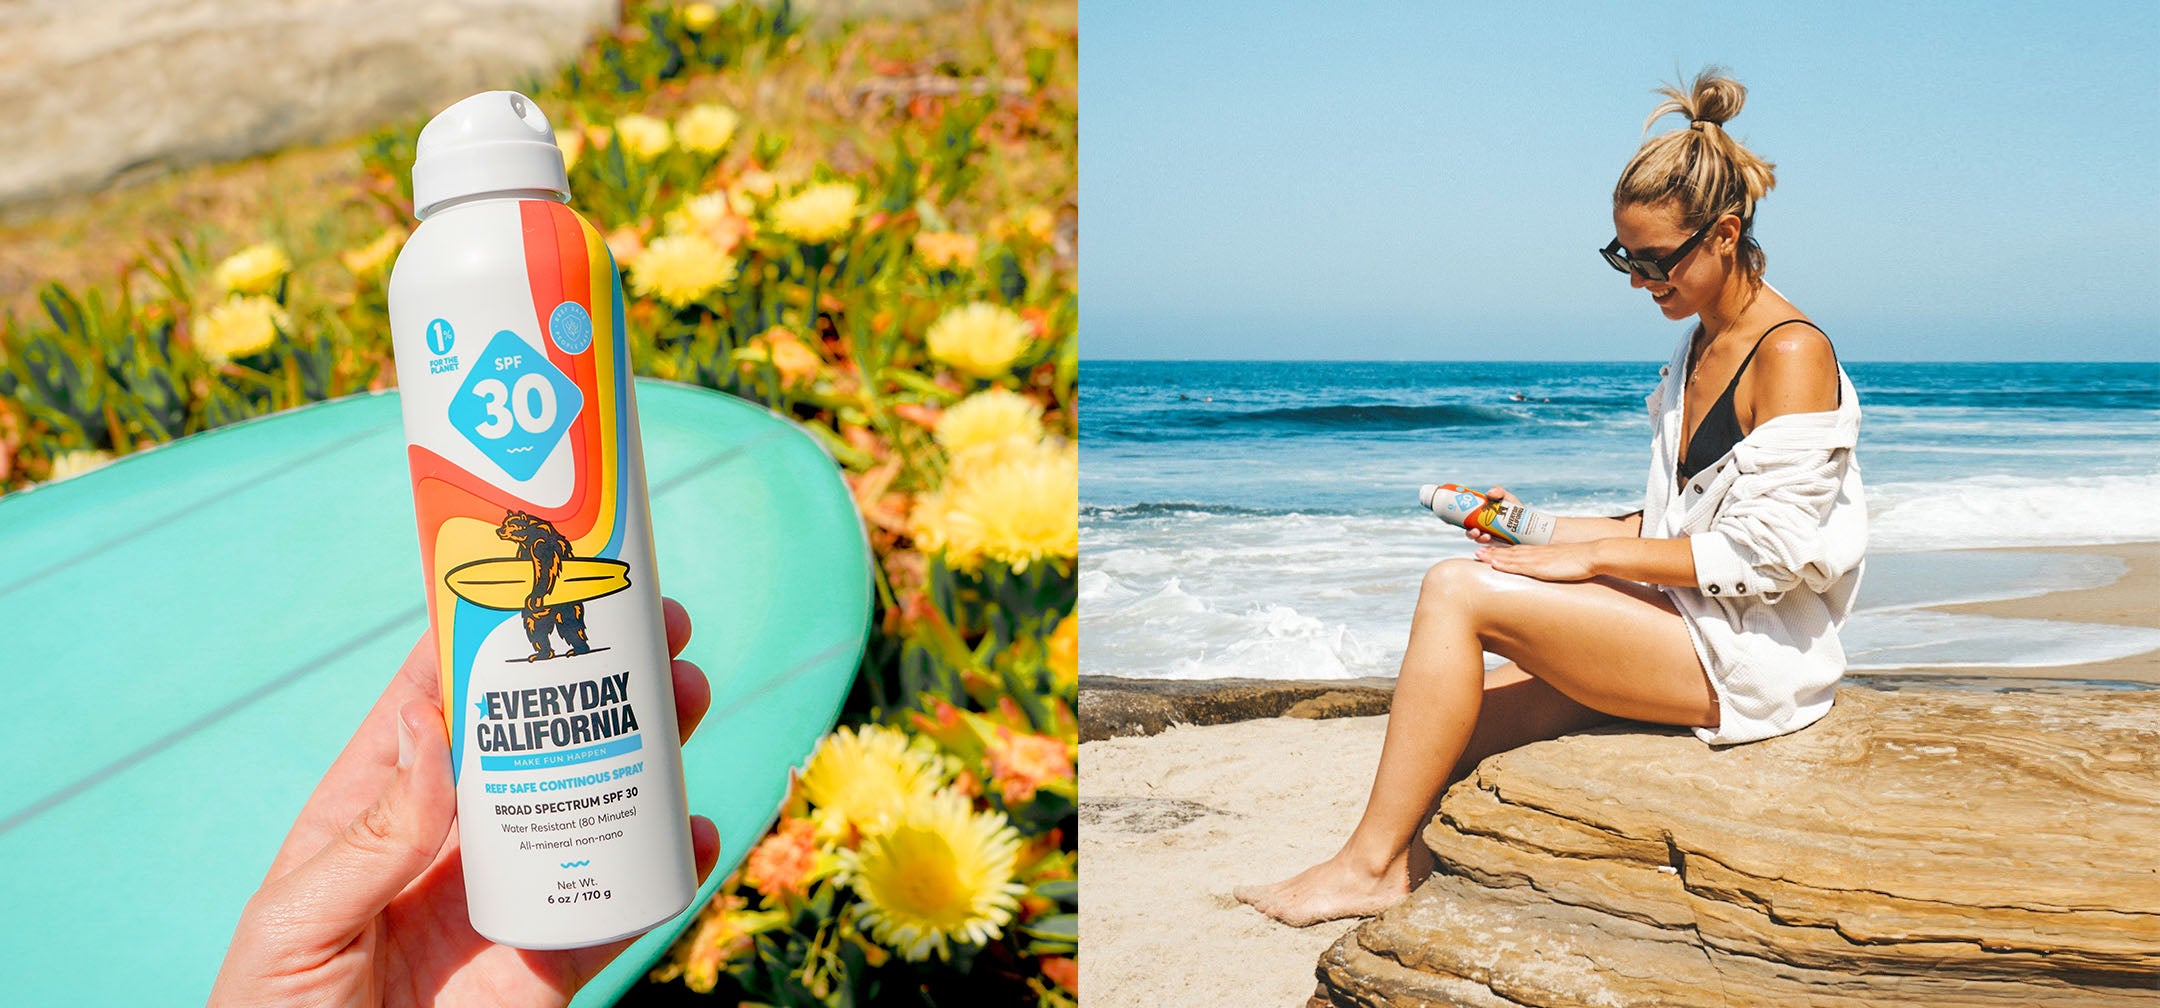 Two side by side photos. The first photo is of a person's hand holding onto a bottle of Everyday California's Reef Safe SPF 30 Spray Sunscreen, with bright yellow flowers and a blue surfboard in the background. The second photo is of a girl at the beach, sitting on a rock in front of the ocean rubbing sunscreen into her skin.